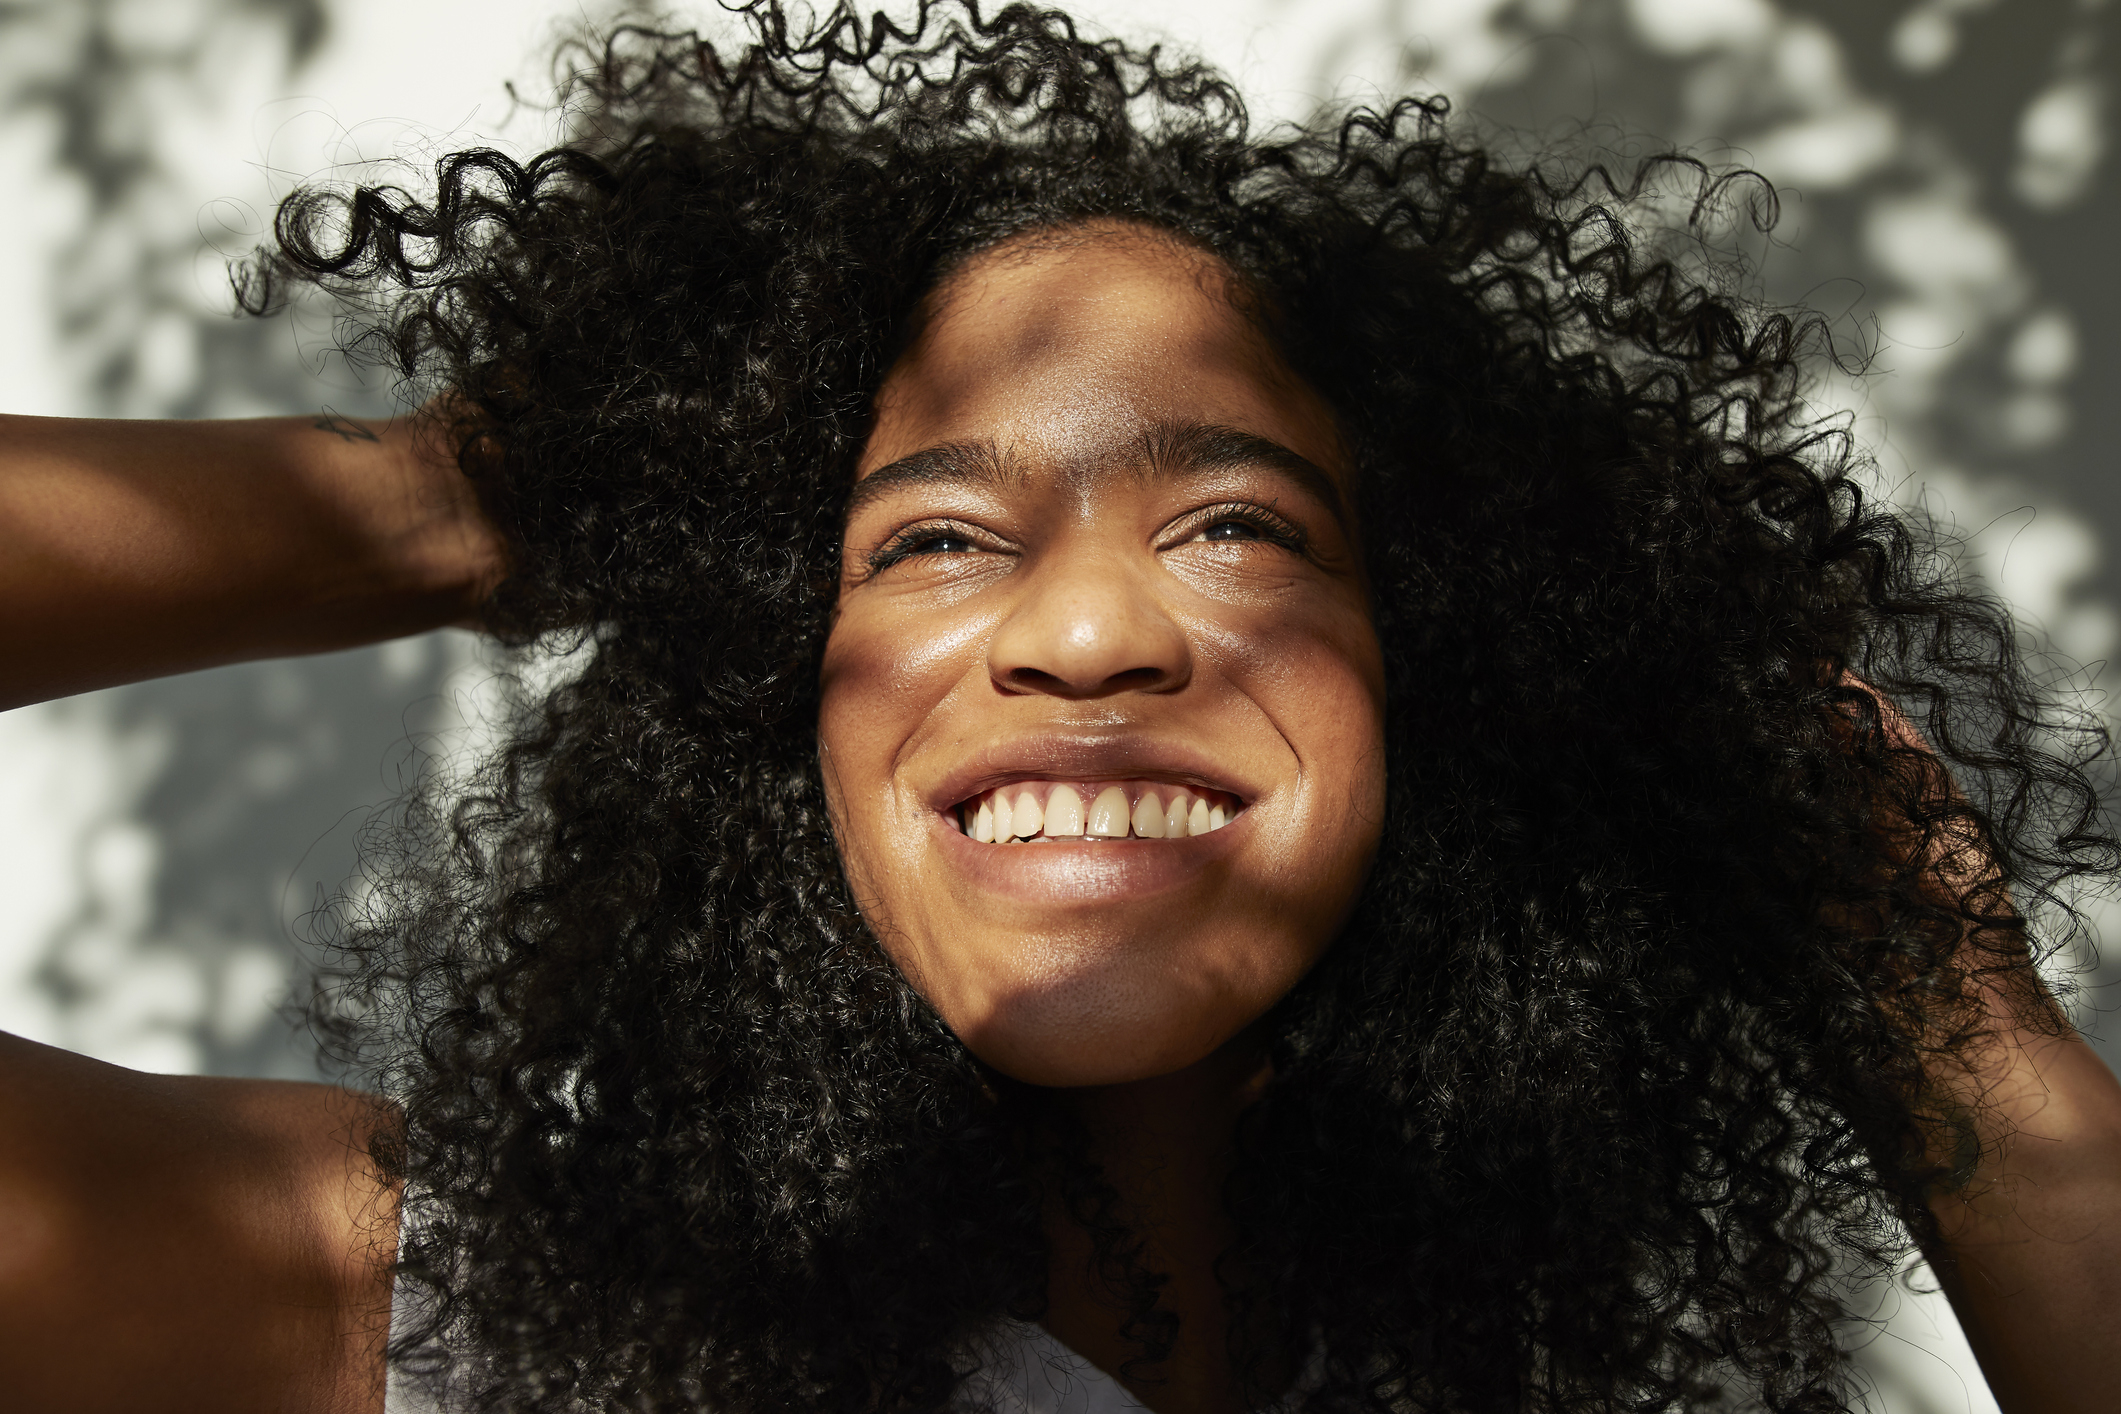 A young Black woman holding her head as she smiles in the direction of sunlight